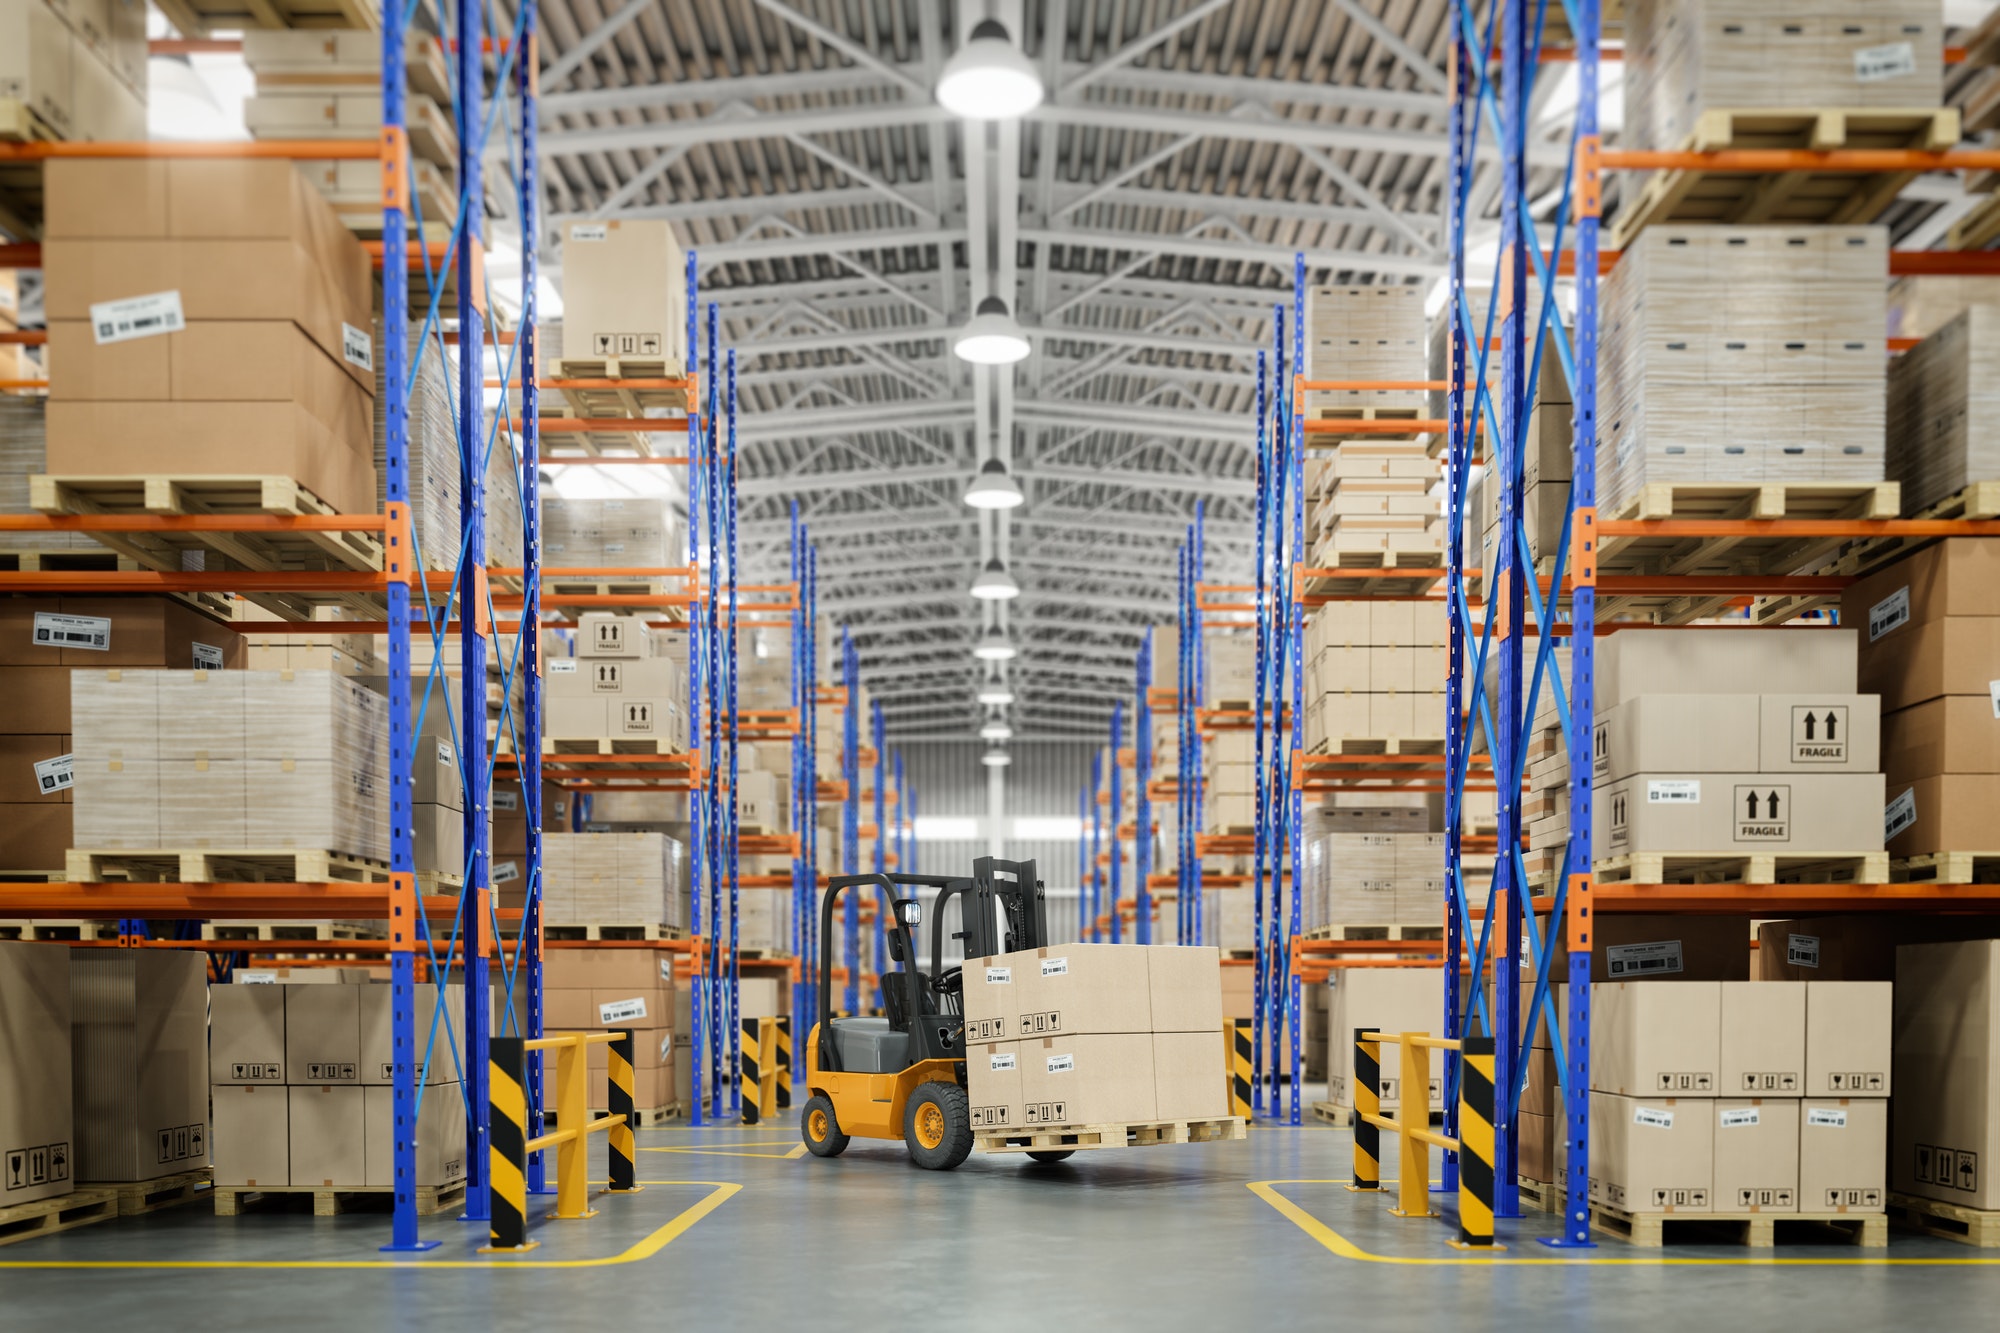 Forklift truck in warehouse or storage and shelves with cardboar